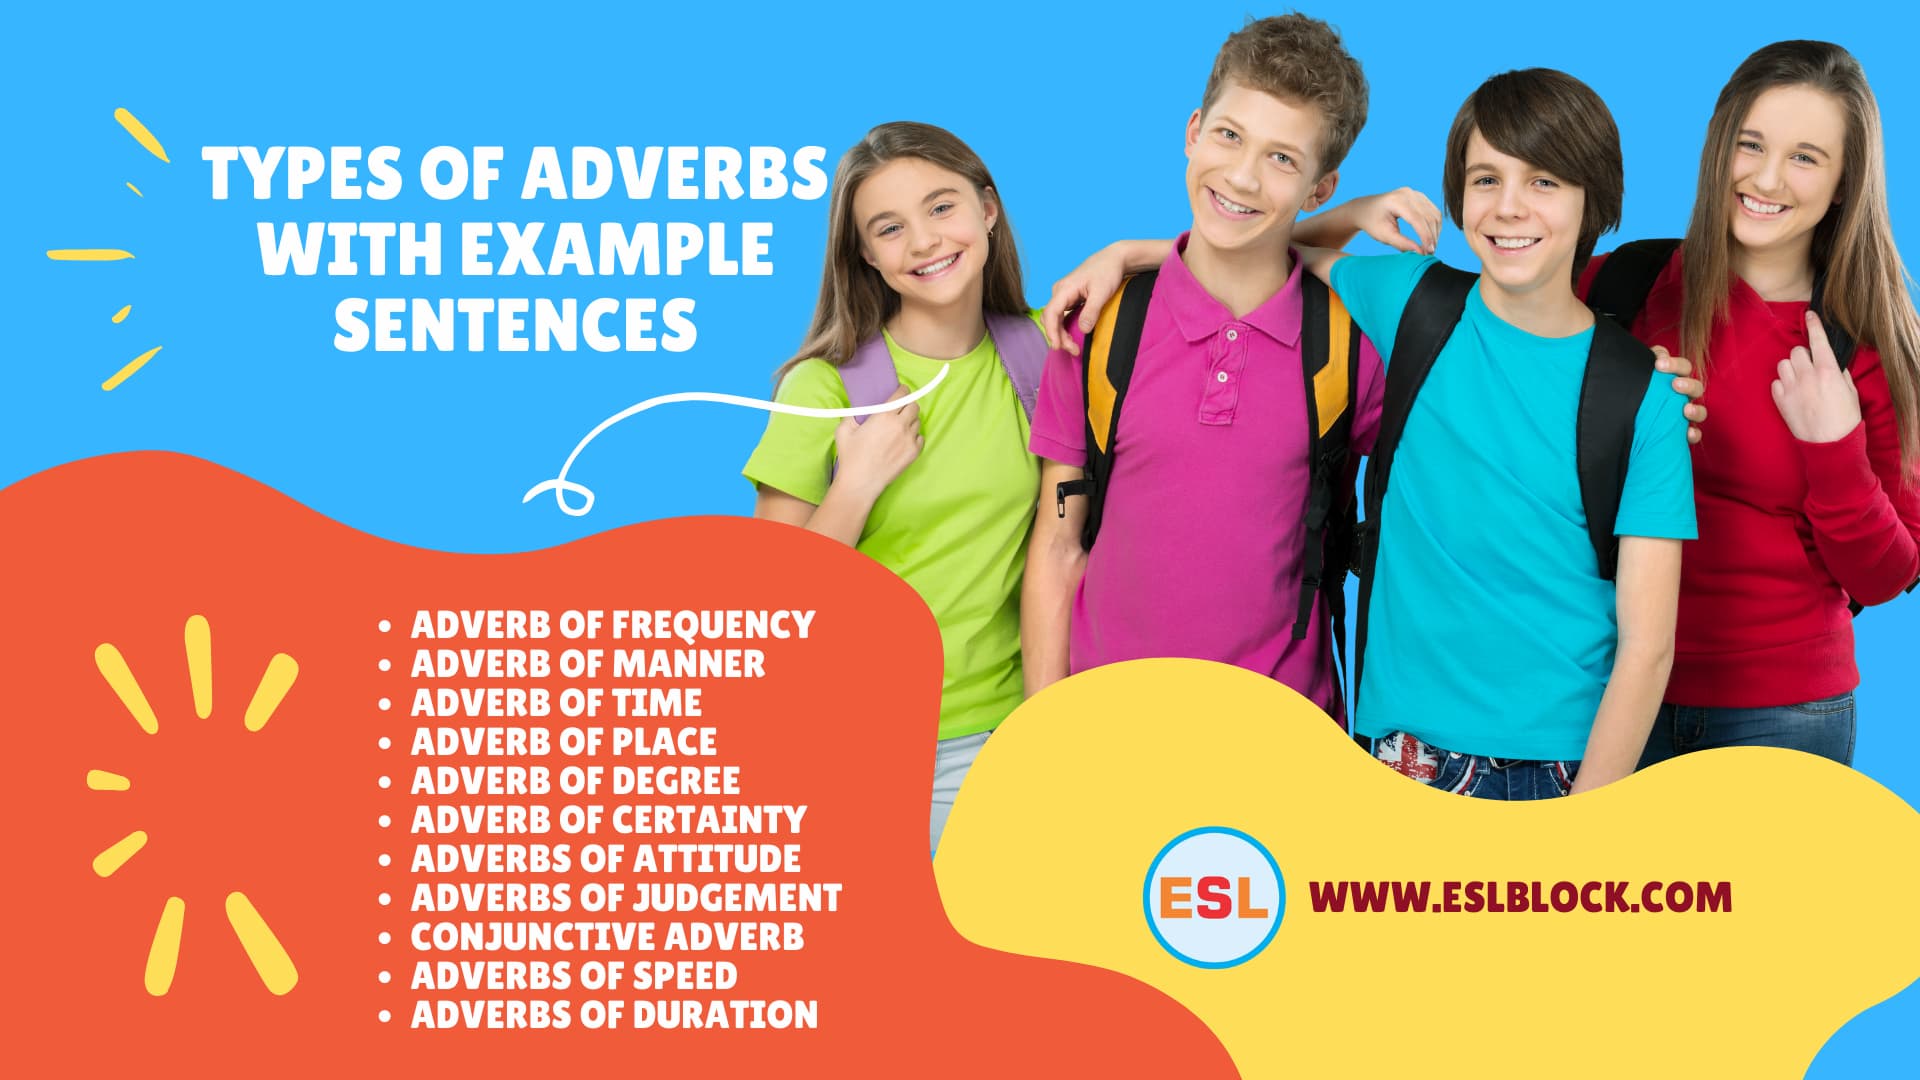 100 Example Sentences Using Adverbs, Adverbs Rules with Example Sentences, Rules of Using Adverbs, Rules of Using Adverbs with Example Sentences, Rules of Using Adverbs with examples, Types of Adverbs, Types of Adverbs with Example Sentences, What are Adverbs, What are the types of Adverbs, What do an Adverbs do, Adverb of Frequency, Adverb of Manner, Adverb of Time, Adverb of Place, Adverb of Degree, Adverb of Certainty, Adverbs of Attitude, Adverbs of Judgement, Conjunctive Adverb, Adverbs of Speed, Adverbs of Duration,